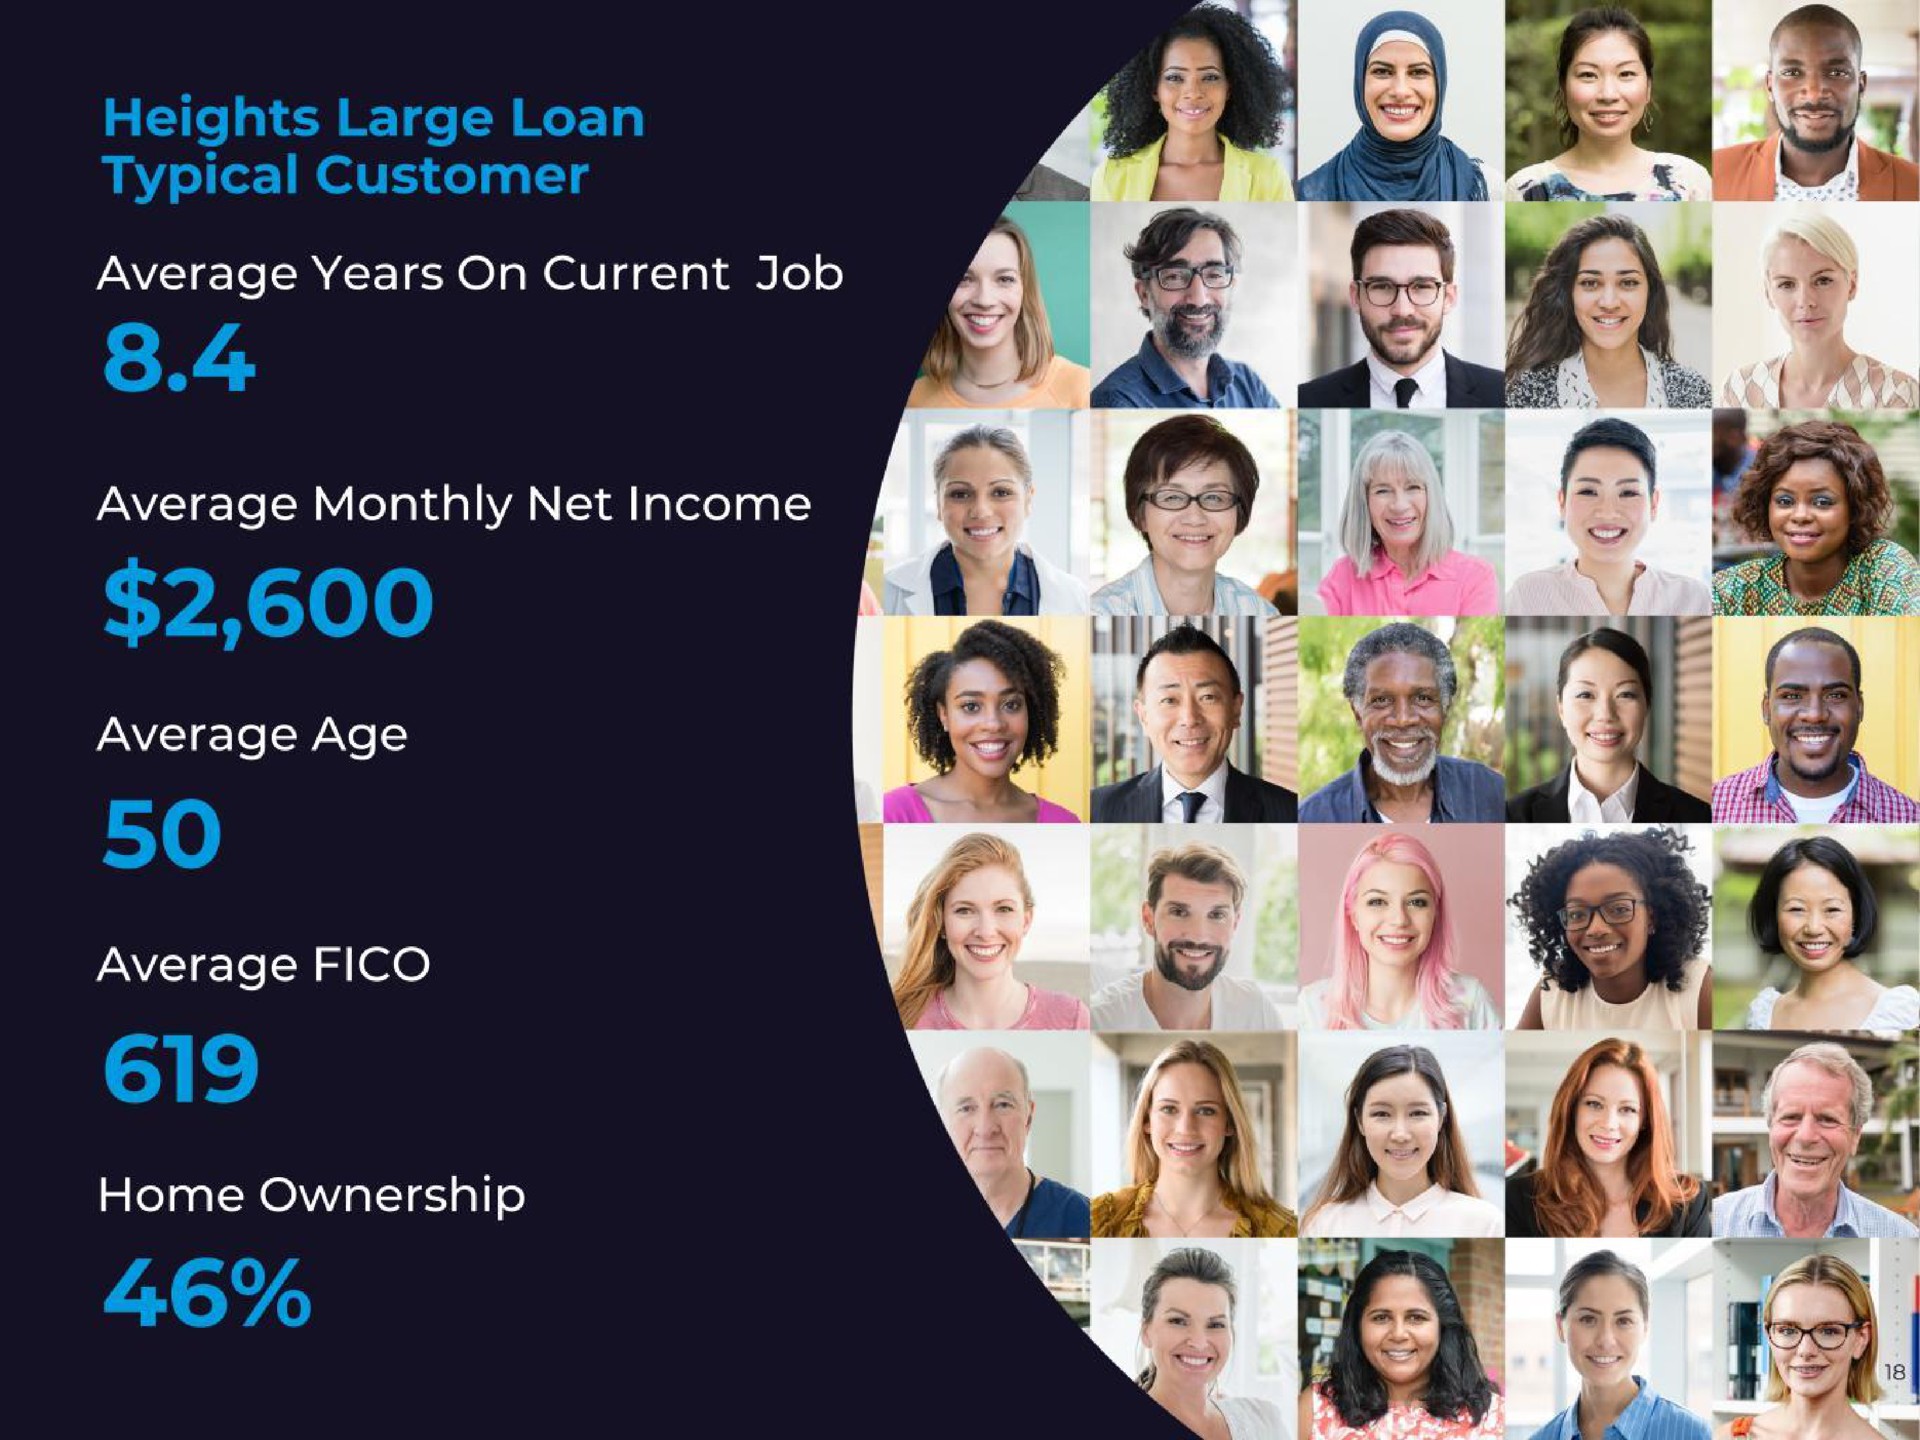 heights large loan typical customer average monthly net income average age average fico | CURO Group Holdings